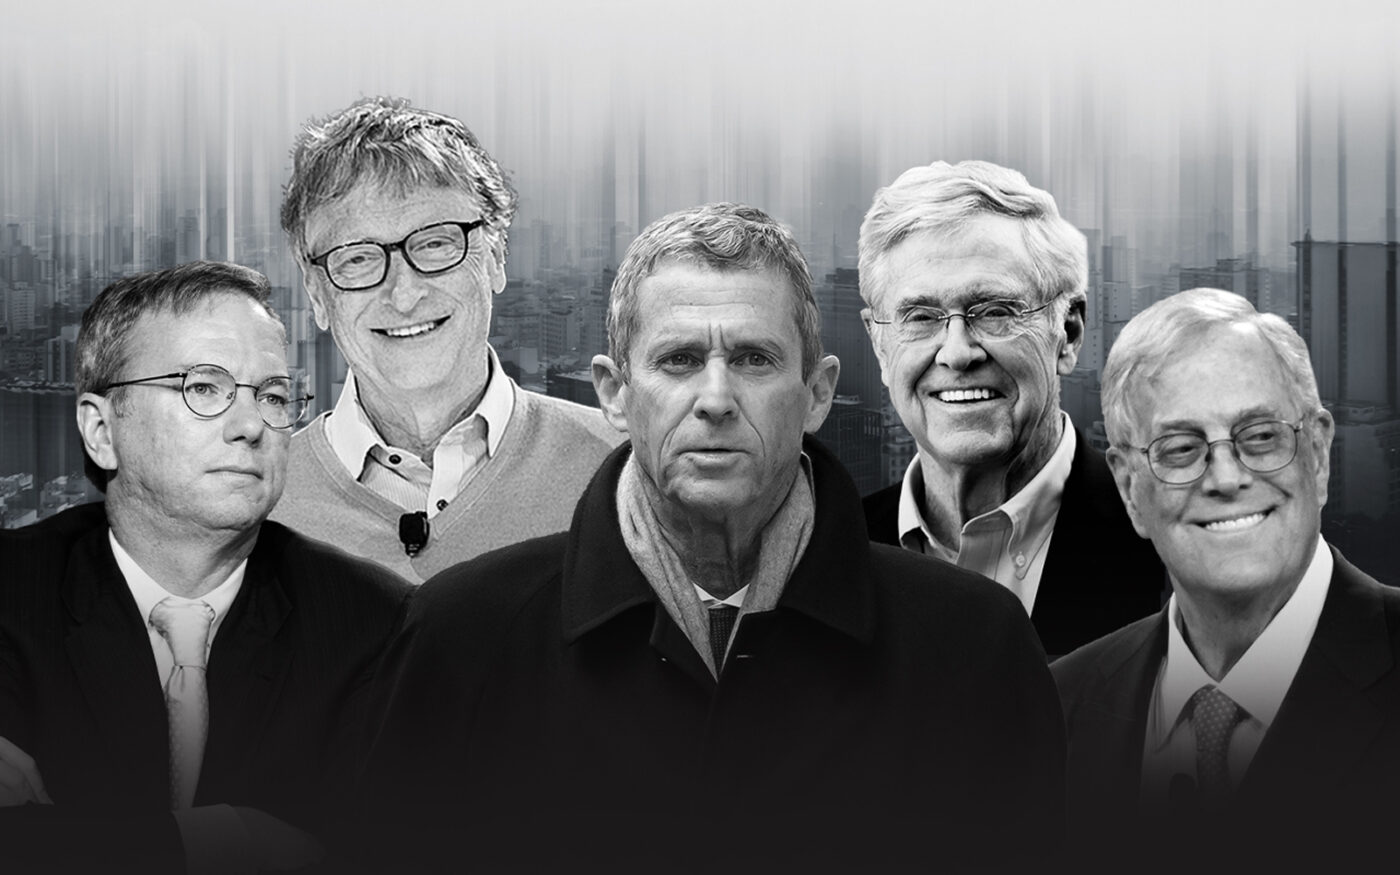 From left: Eric Schmidt, Bill Gates, Beny Steinmetz, and Charles and David Koch